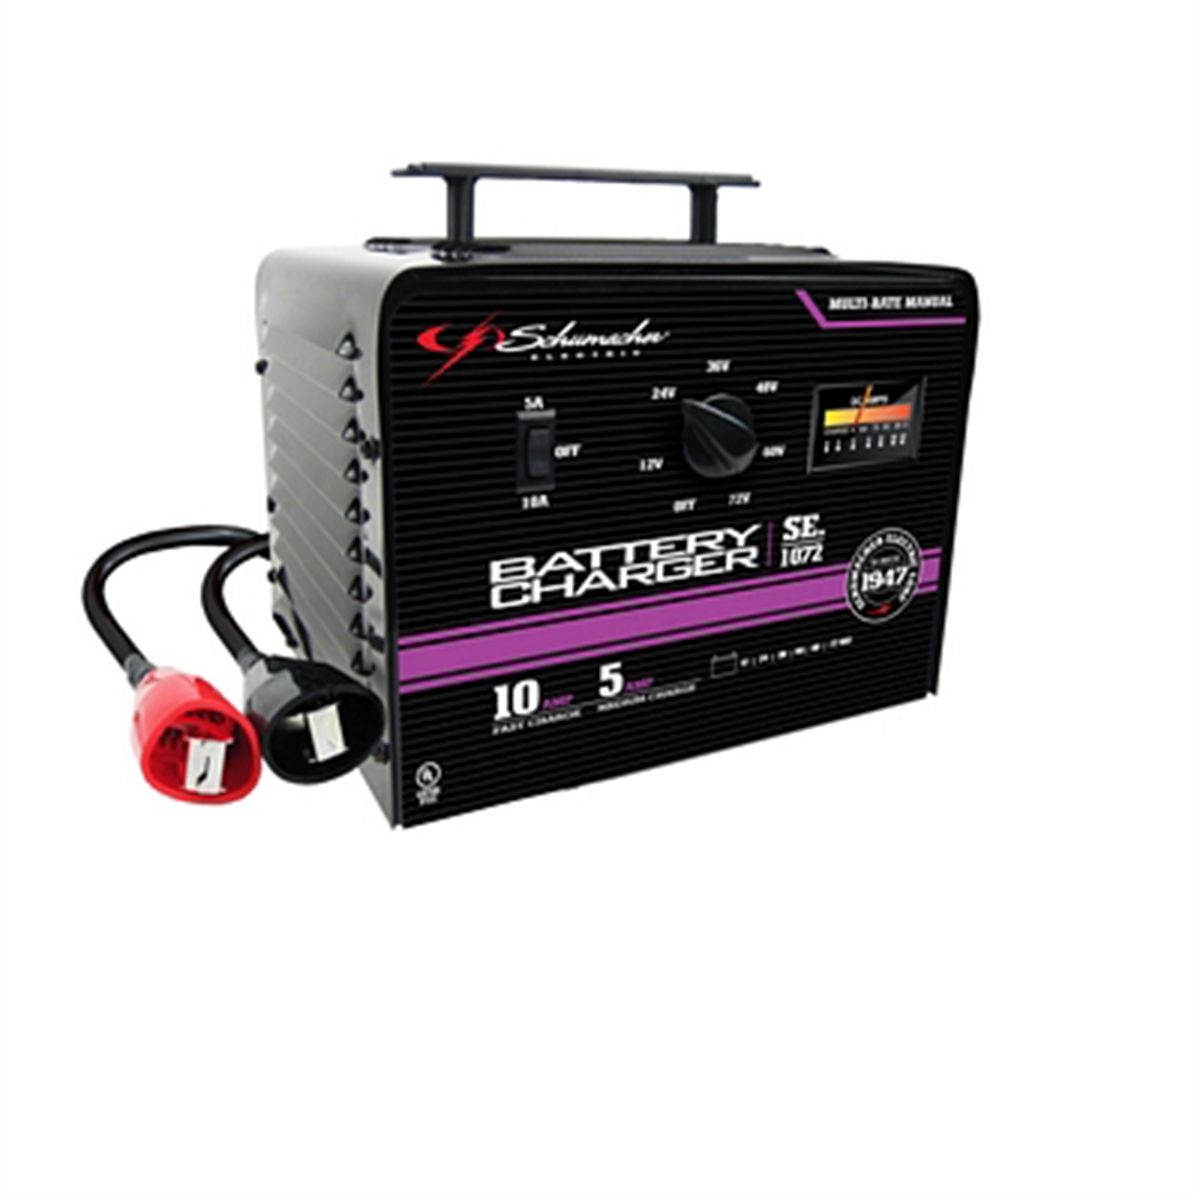 BATTERY CHARGER BANK CHARGER